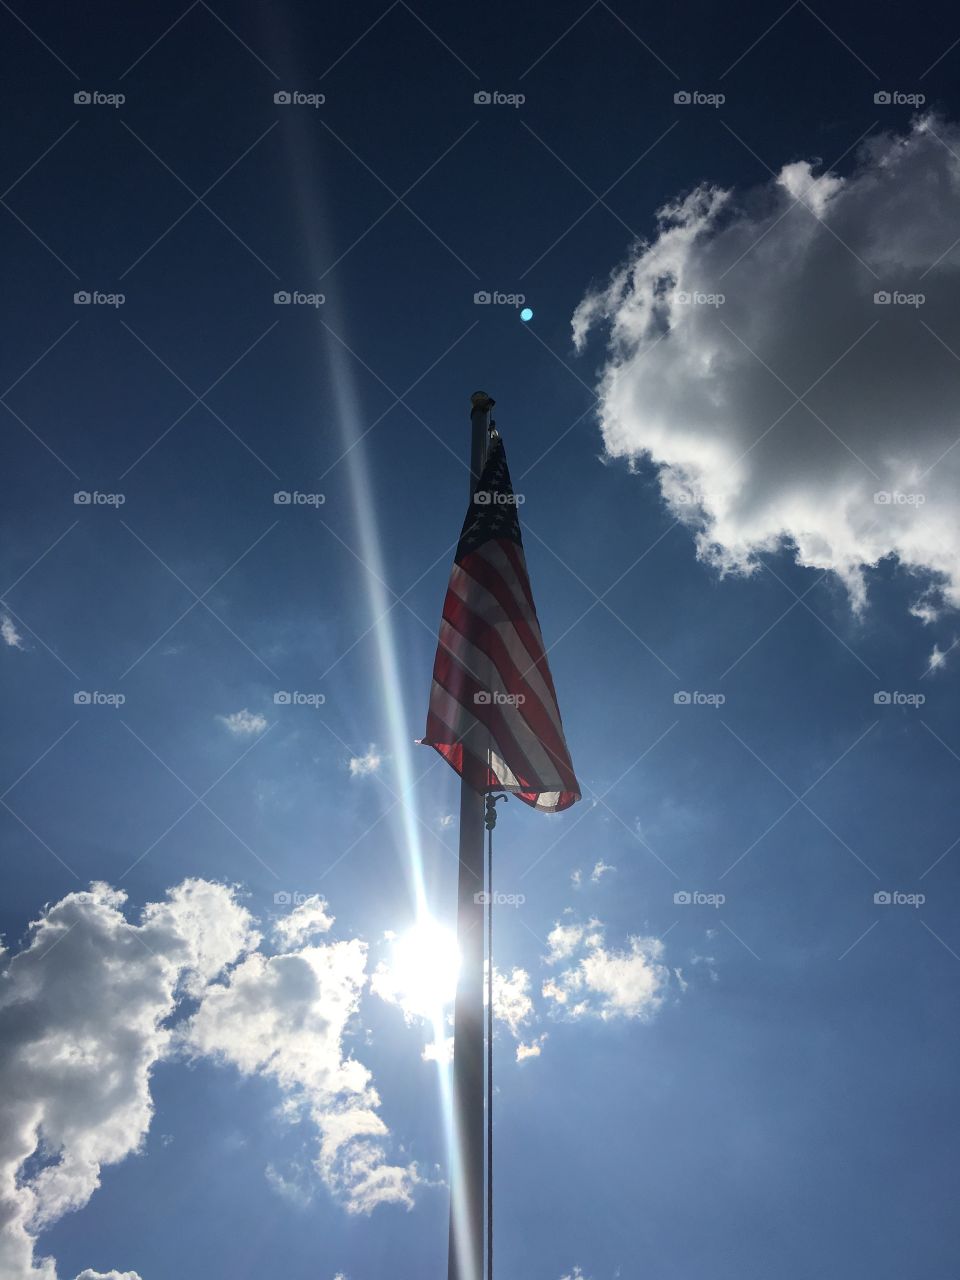 This is a picture of the American flag on a pole on a bright sunny day as you could see this guy in the background it is very bright and beautiful. I will be taking more pictures of the American flag. We love the USA  flag because we are from here I hope you enjoy all my photos and pictures.